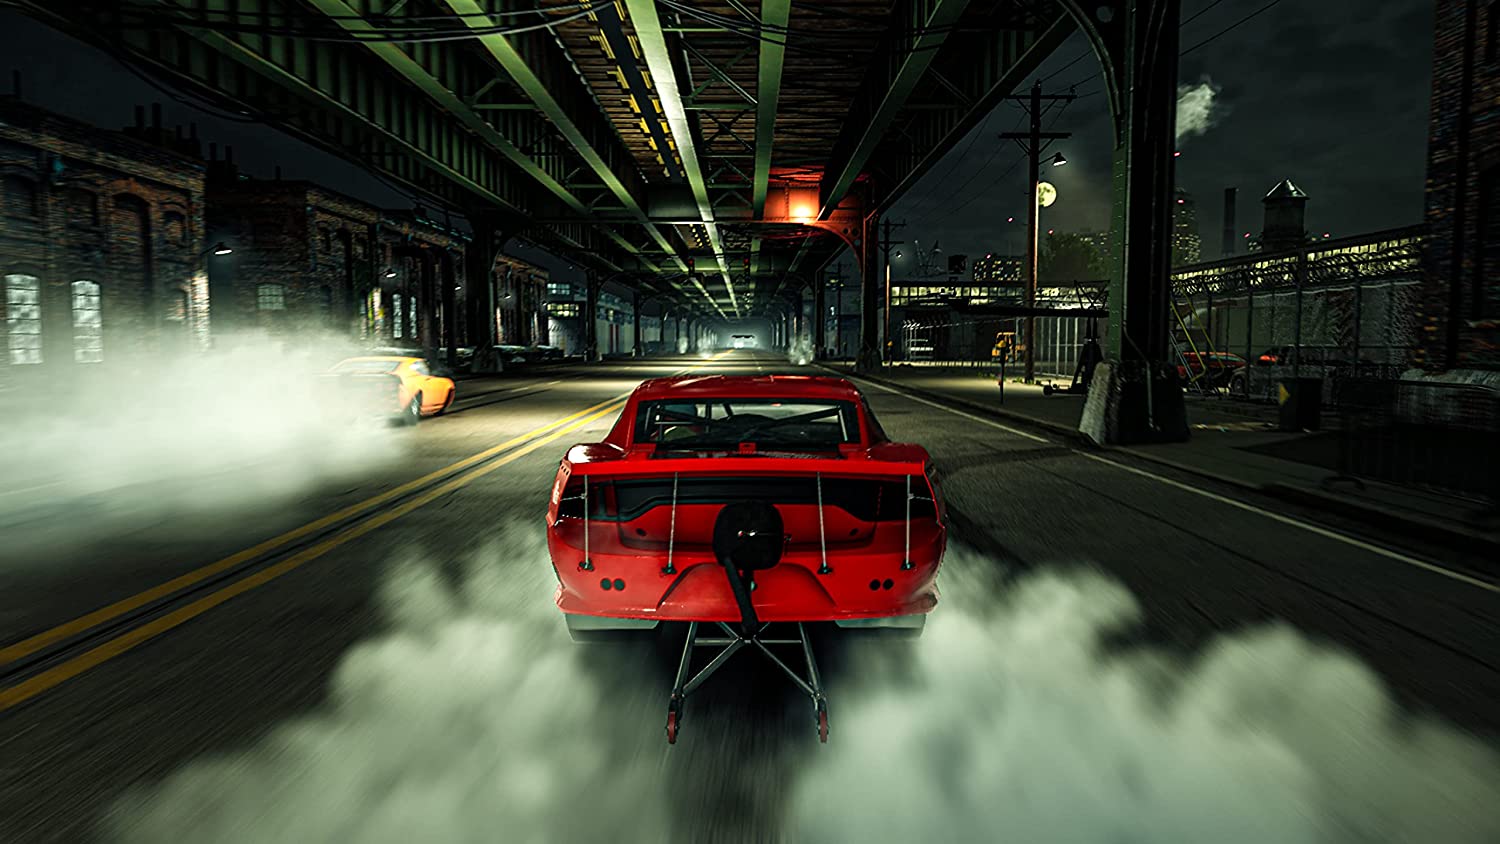 Street Outlaws 2: Winner Takes All - (XSX) Xbox Series X Video Games Game Mill   